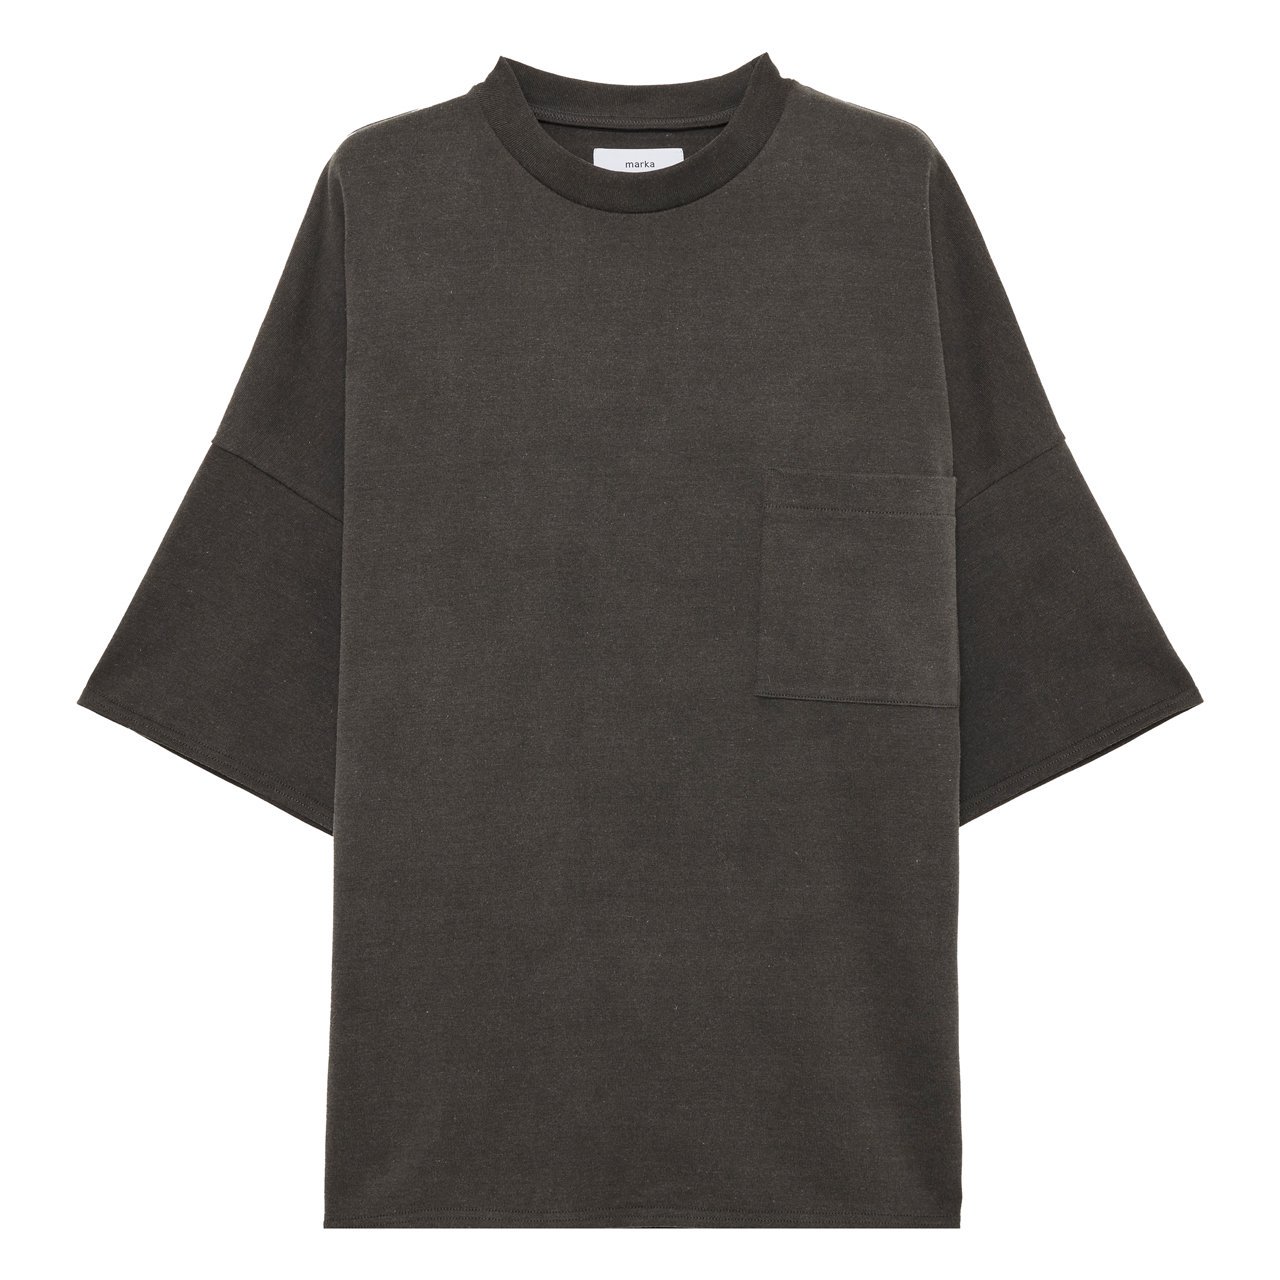 <img class='new_mark_img1' src='https://img.shop-pro.jp/img/new/icons5.gif' style='border:none;display:inline;margin:0px;padding:0px;width:auto;' />marka (ޡ)POCKET TEE FADED BLACK -20//1 RECYCLE SUVIN ORGANIAC COTTON KNIT-